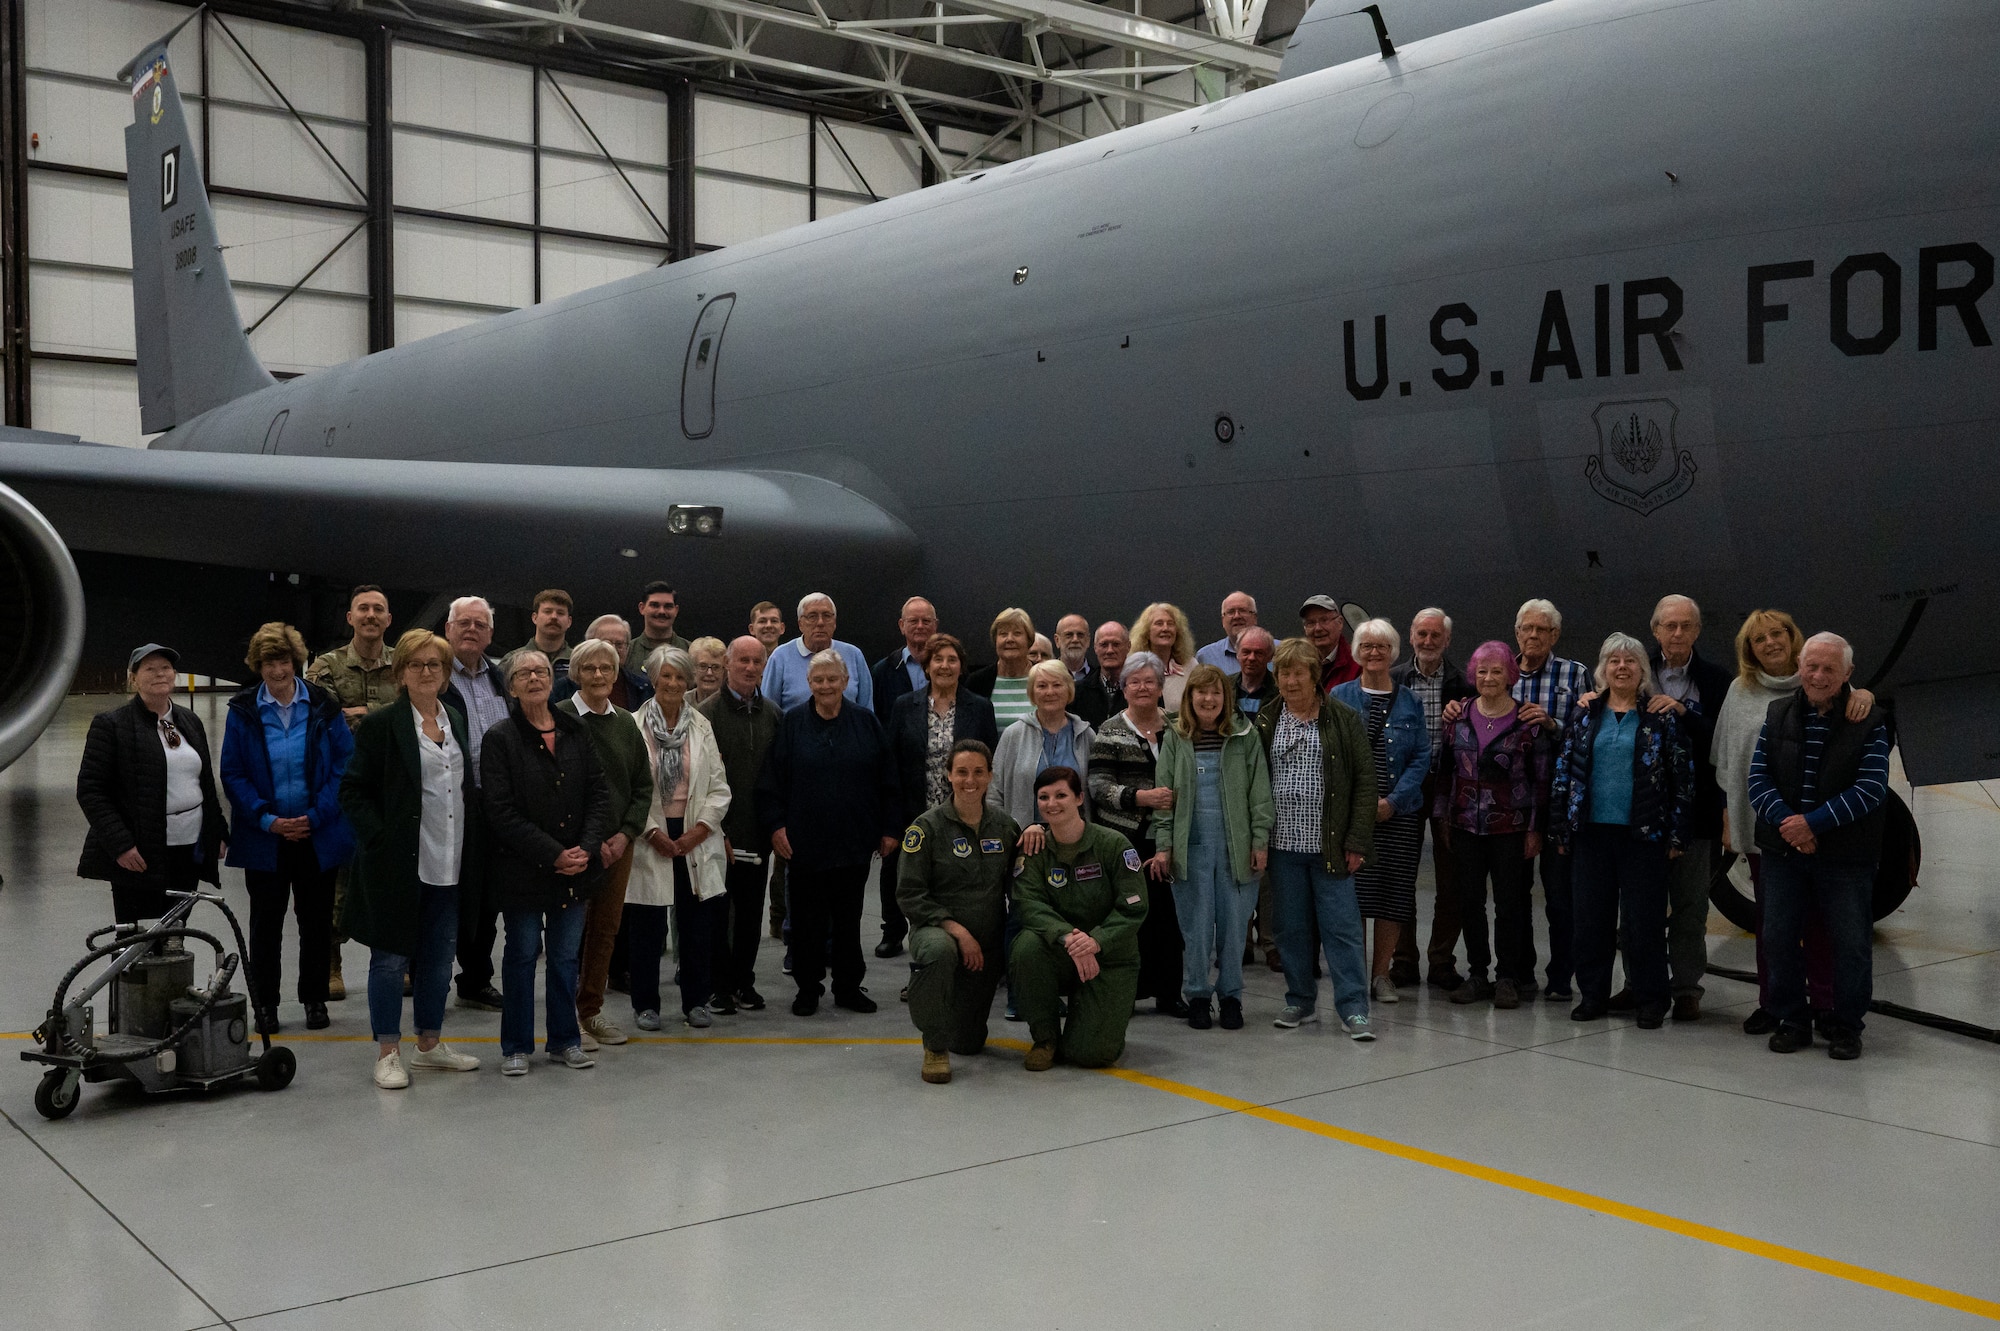 U.S. Air Force Airmen and members of the University of the Third Age stand together for a group photo in front of a KC-135 Stratotanker aircraft during a base tour at Royal Air Force Mildenhall, England, May 16, 2023.